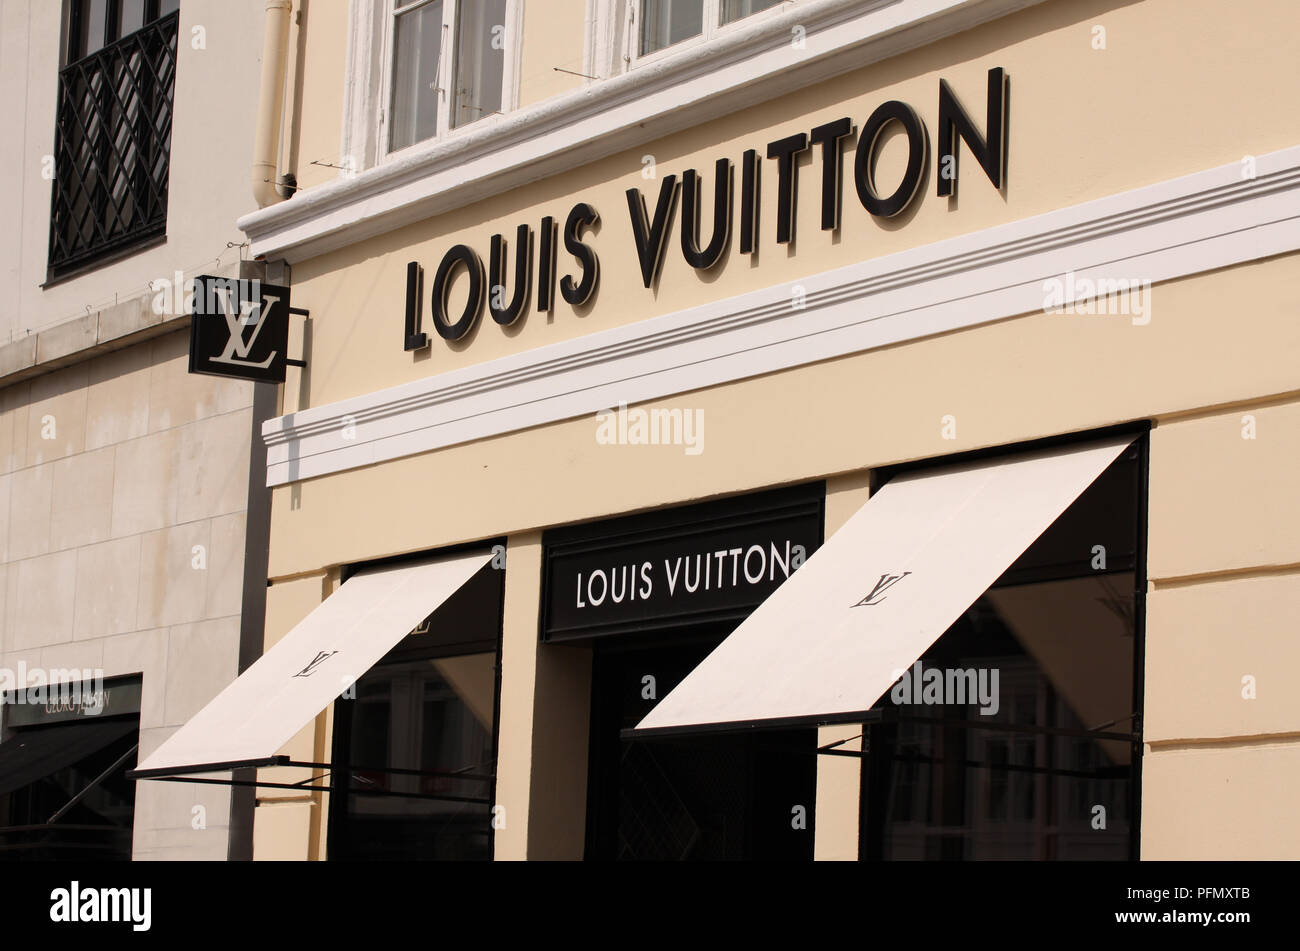 Vuitton High Resolution Stock Photography Images - Alamy